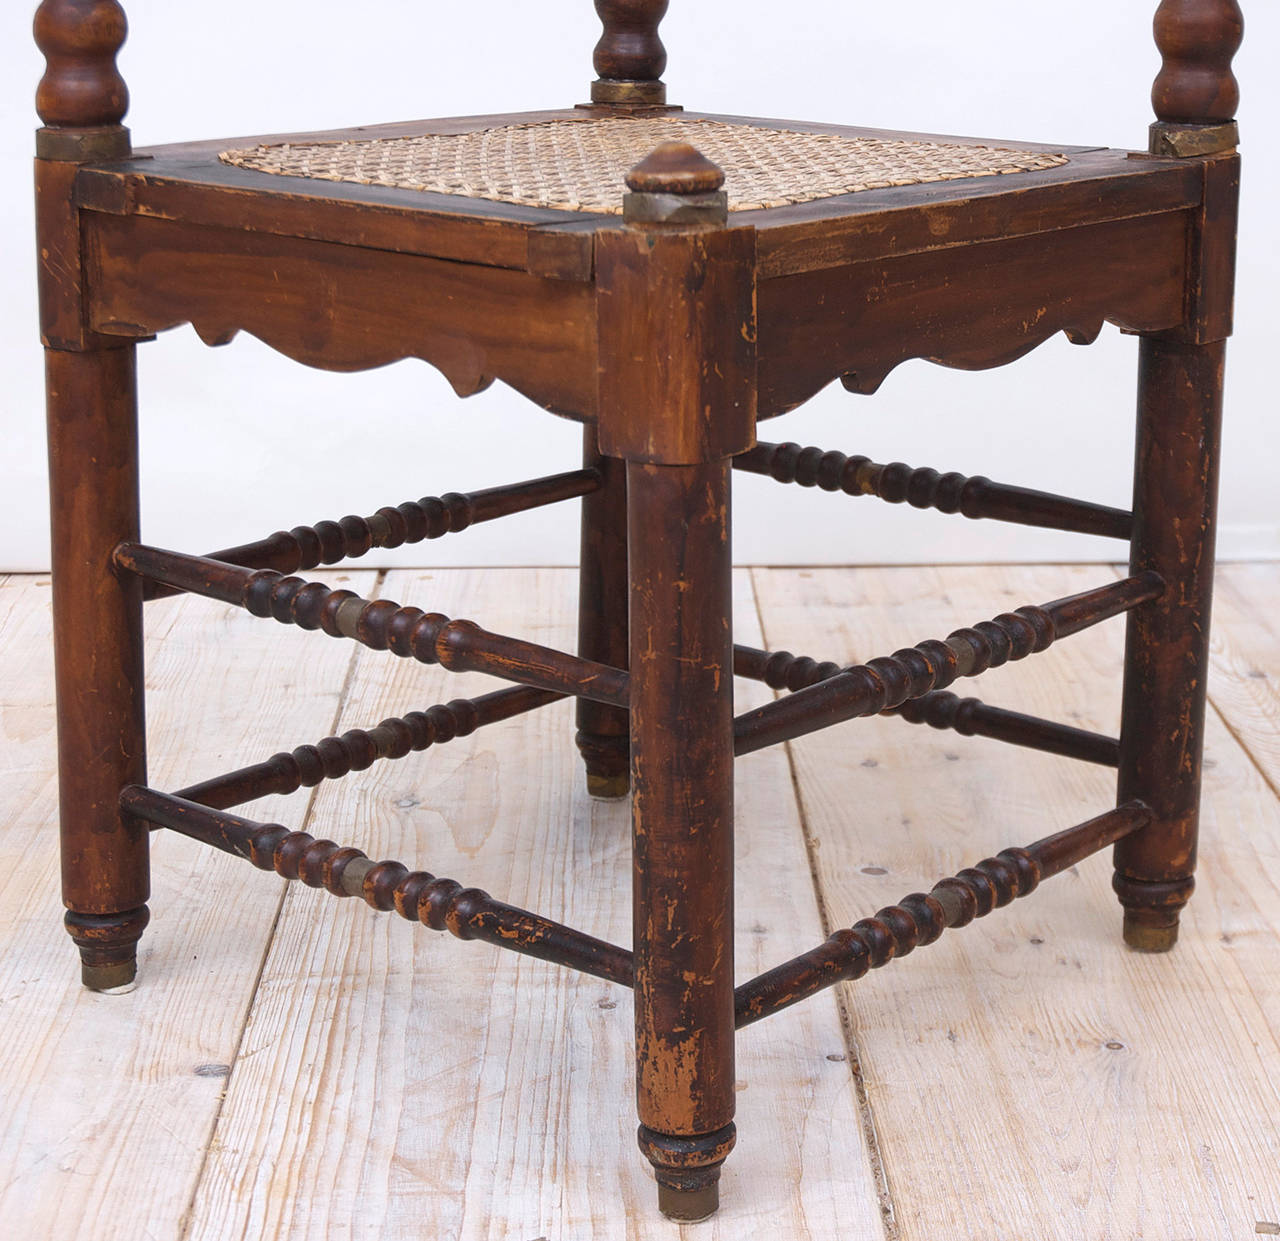 Caning Dutch Colonial Corner Chair from Suriname